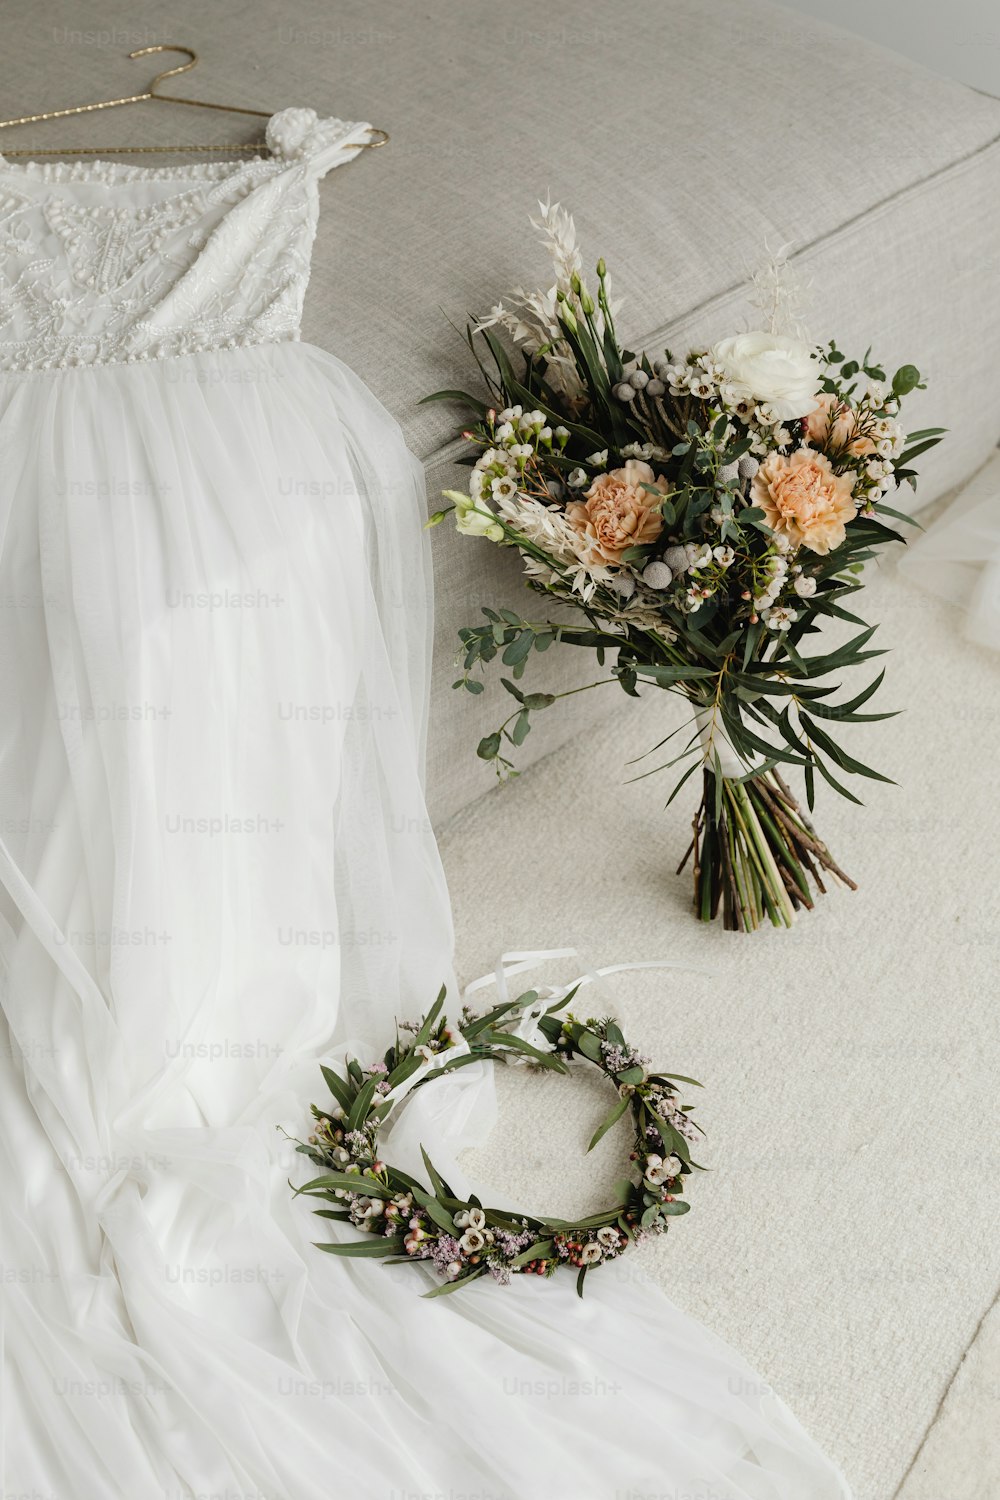 a bride's dress and flowers on a couch